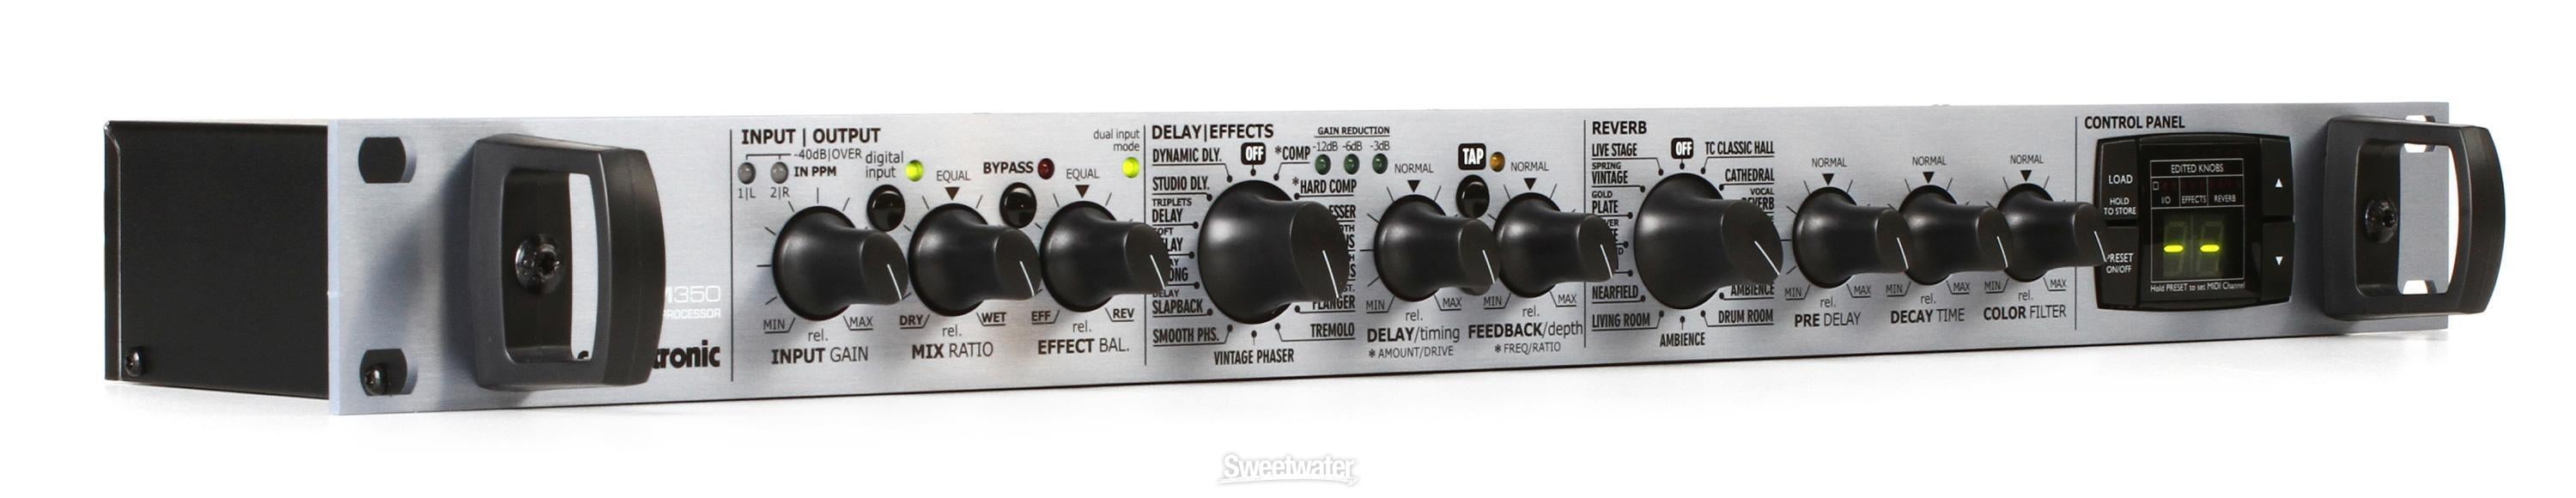 TC Electronic M350 | Sweetwater